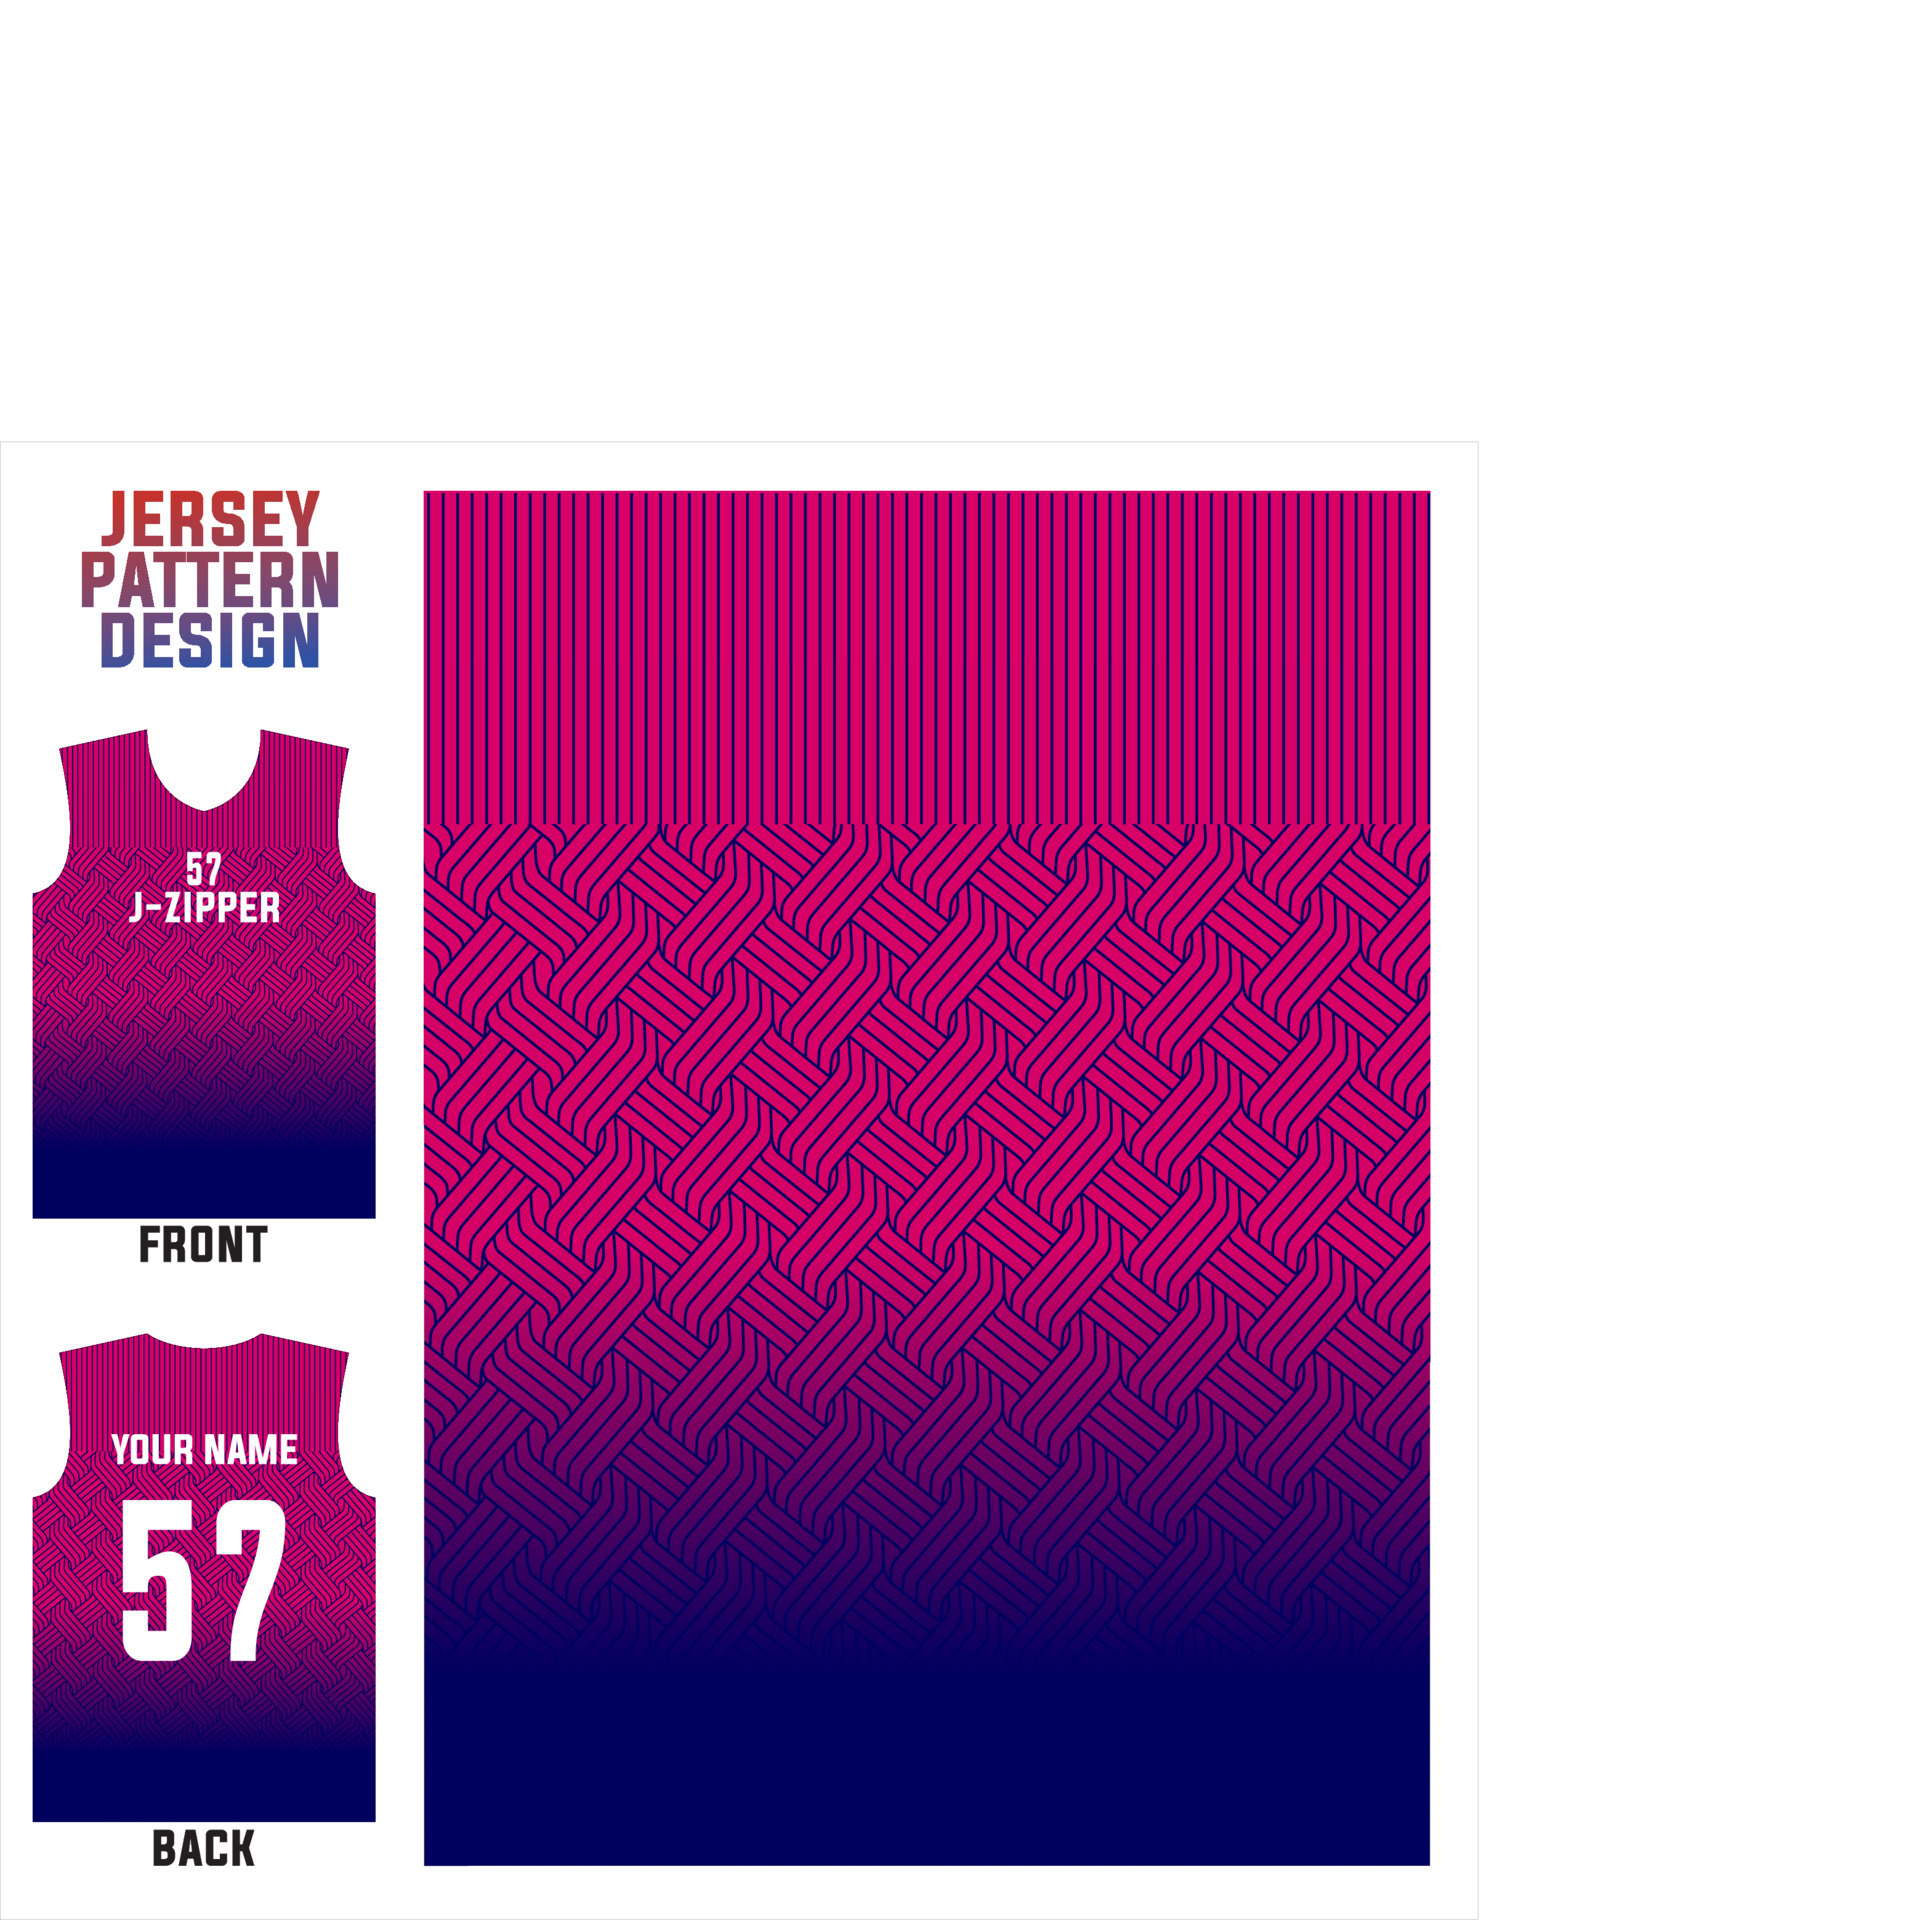 Abstract concept vector jersey pattern template for printing or sublimation  sports uniforms football vo…